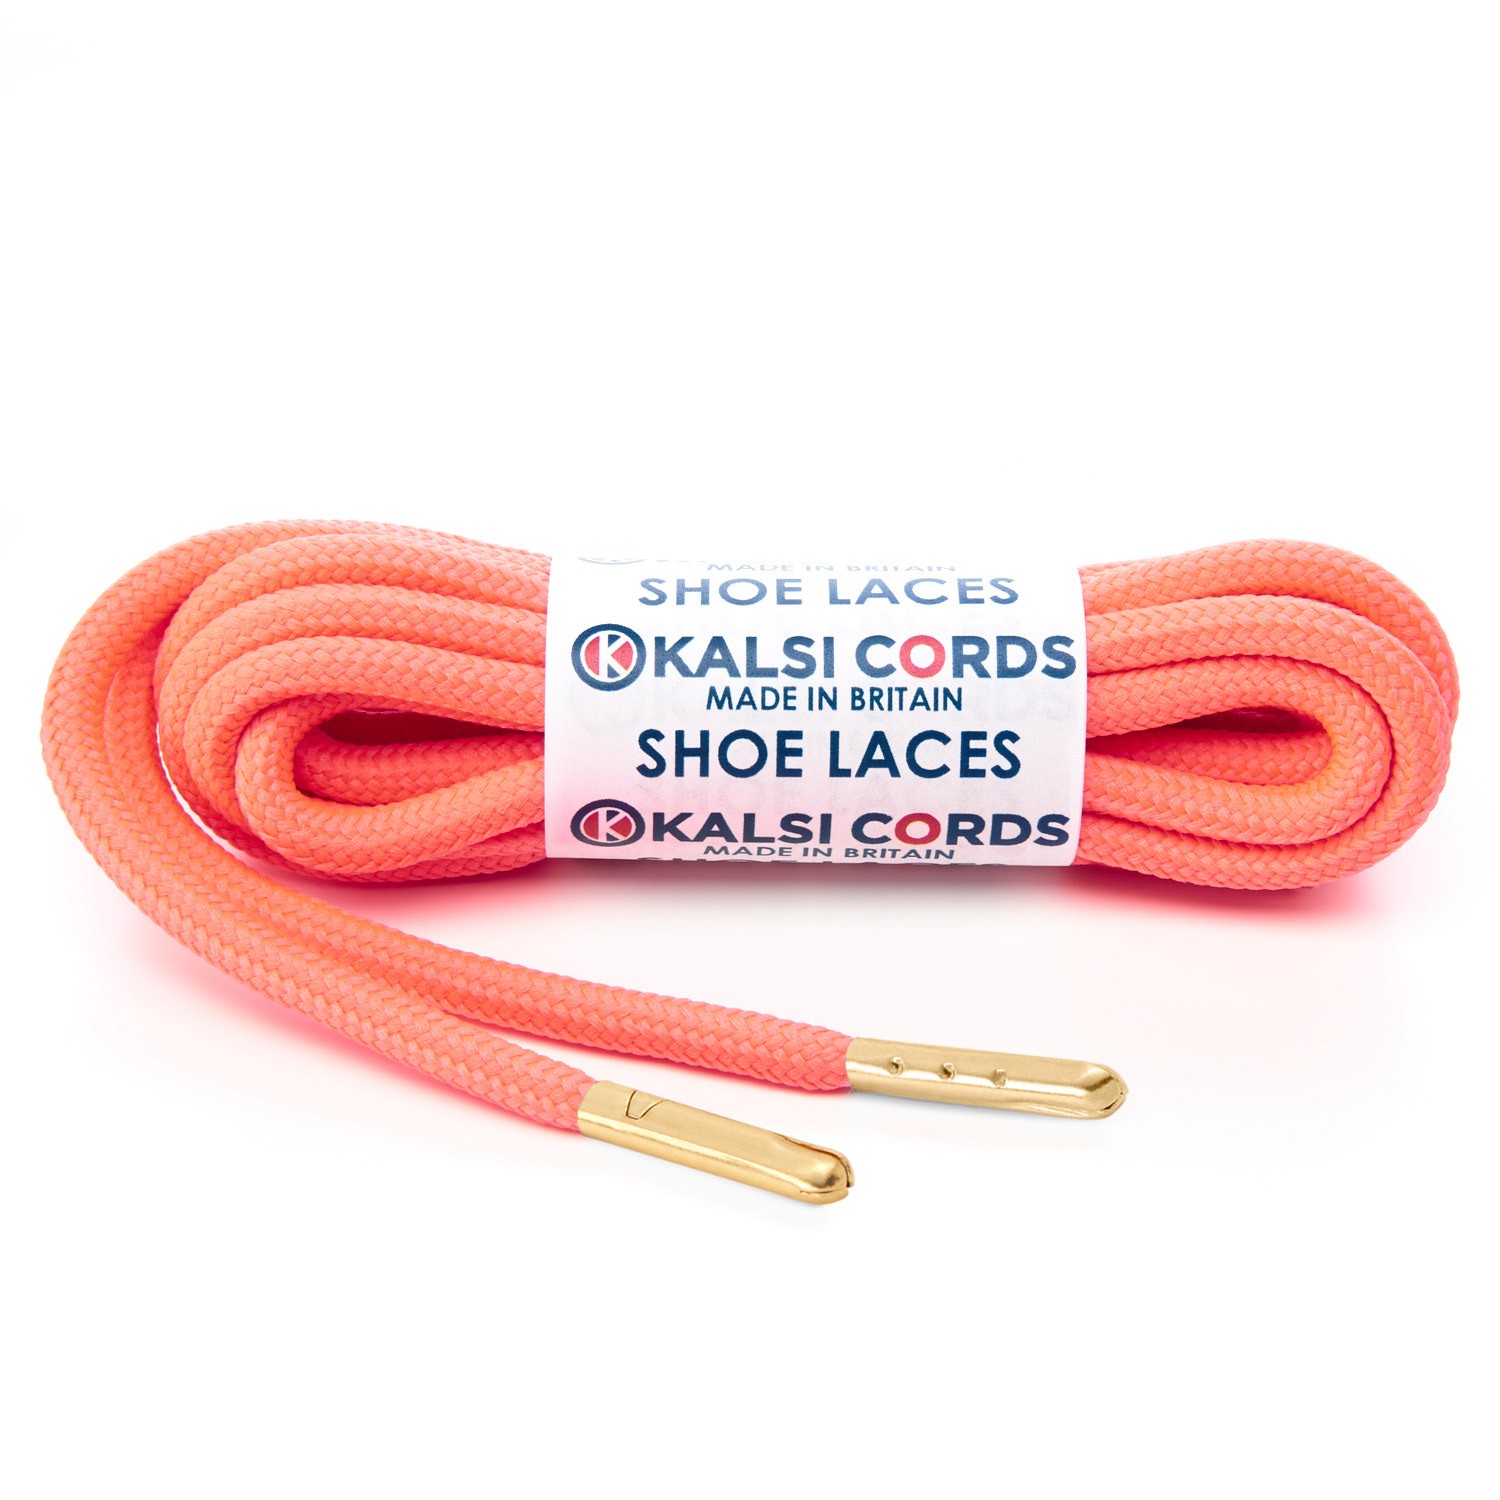 T621 5mm Round Polyester Shoe Laces Fluorescent Pink 1 Gold Metal Tip Kalsi Cords